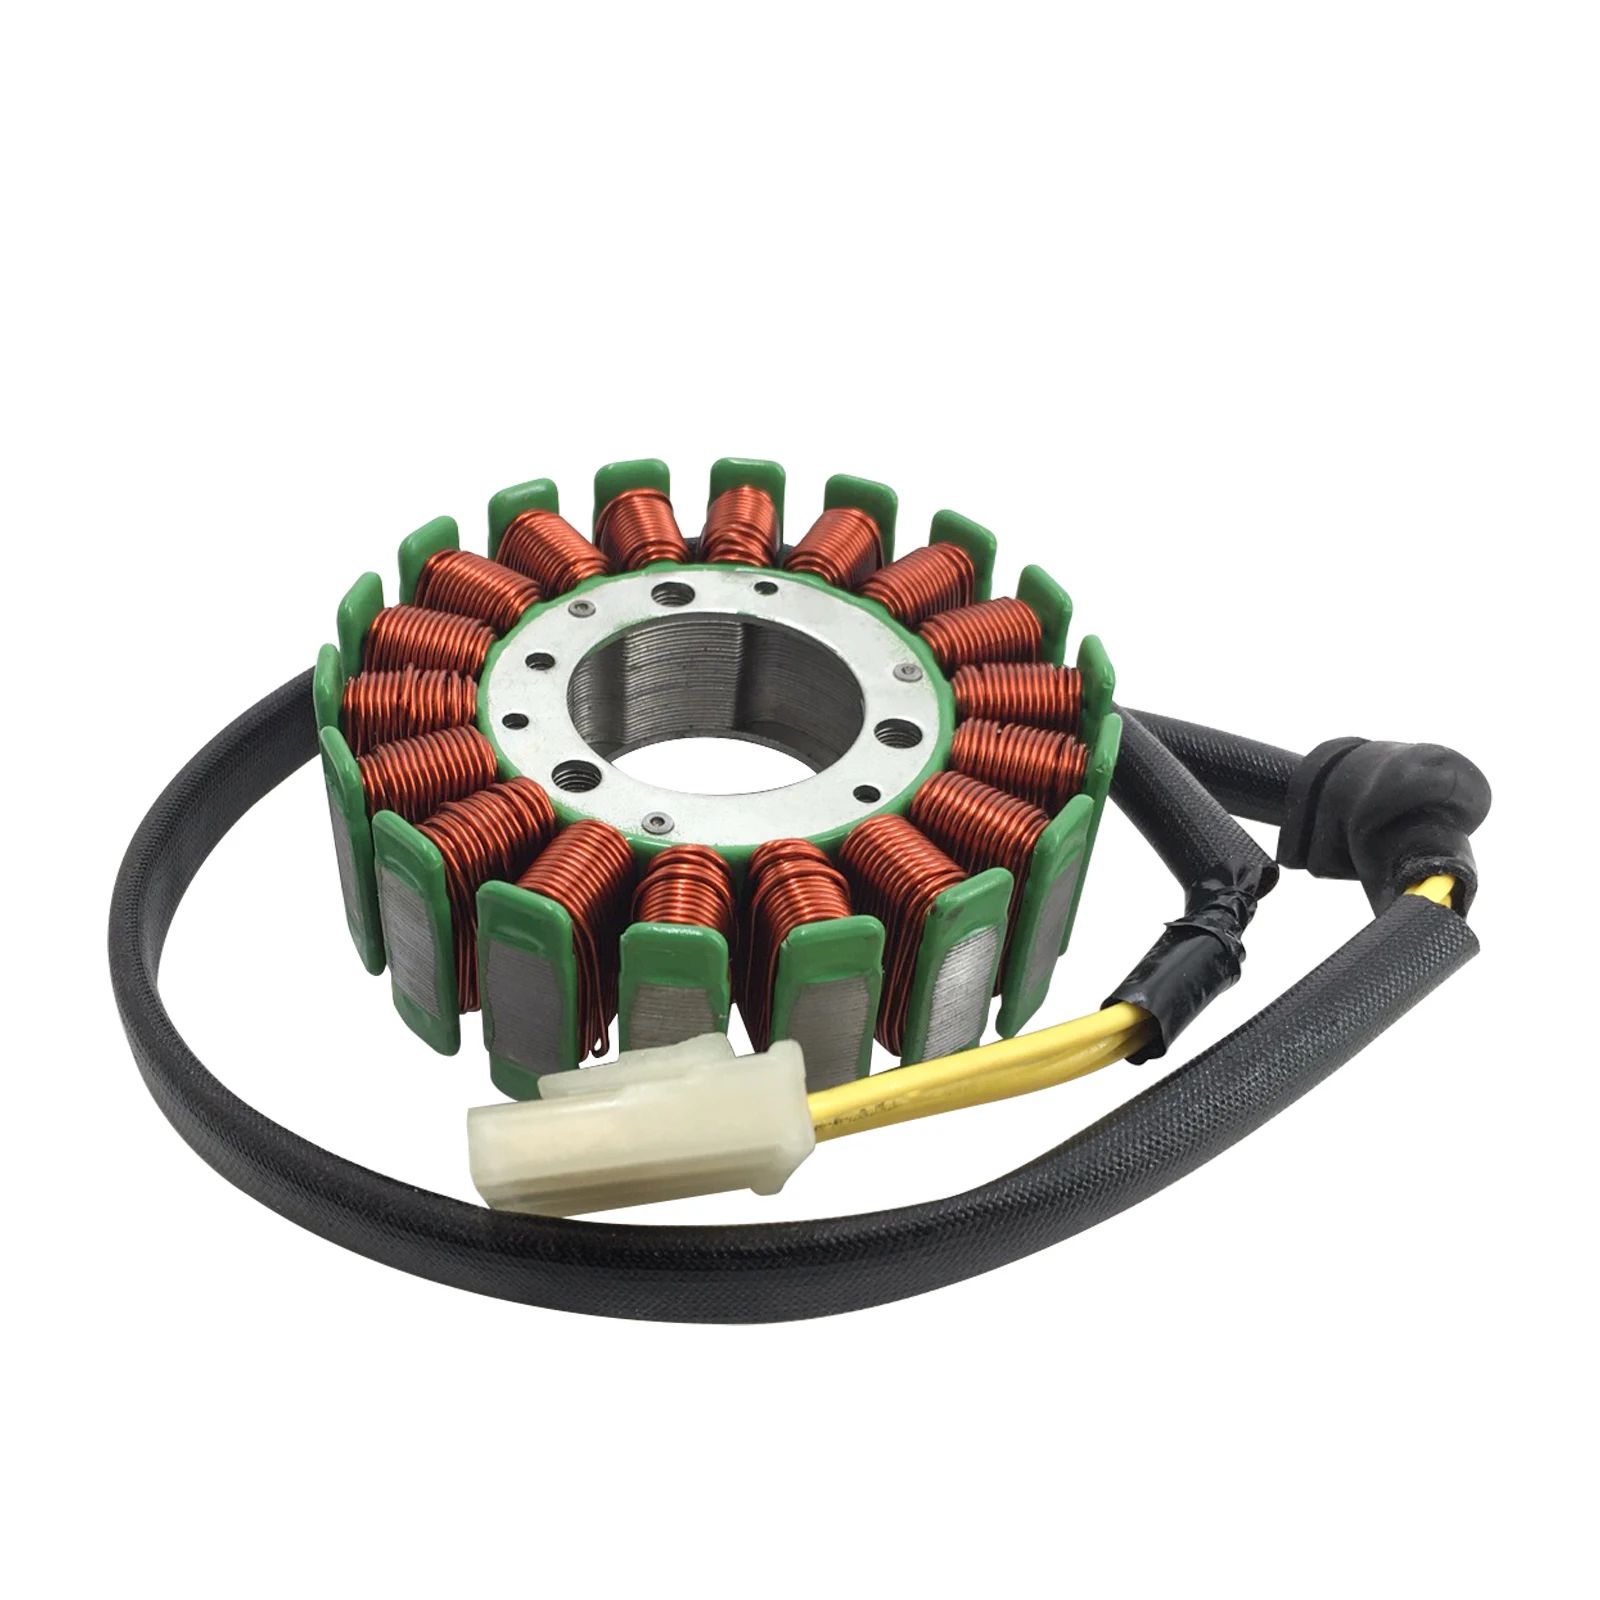 Generator Stator Coils Ignition Stator Coil Magneto For KTM 125 200 DUKE 125 200 RC125 RC200 /ABS 90139004000 Motorcycle Quad xfkm 316 a1 flat twisted wire fused clapton hive premade wires alien mix twisted quad tiger coils heating resistance rda coil